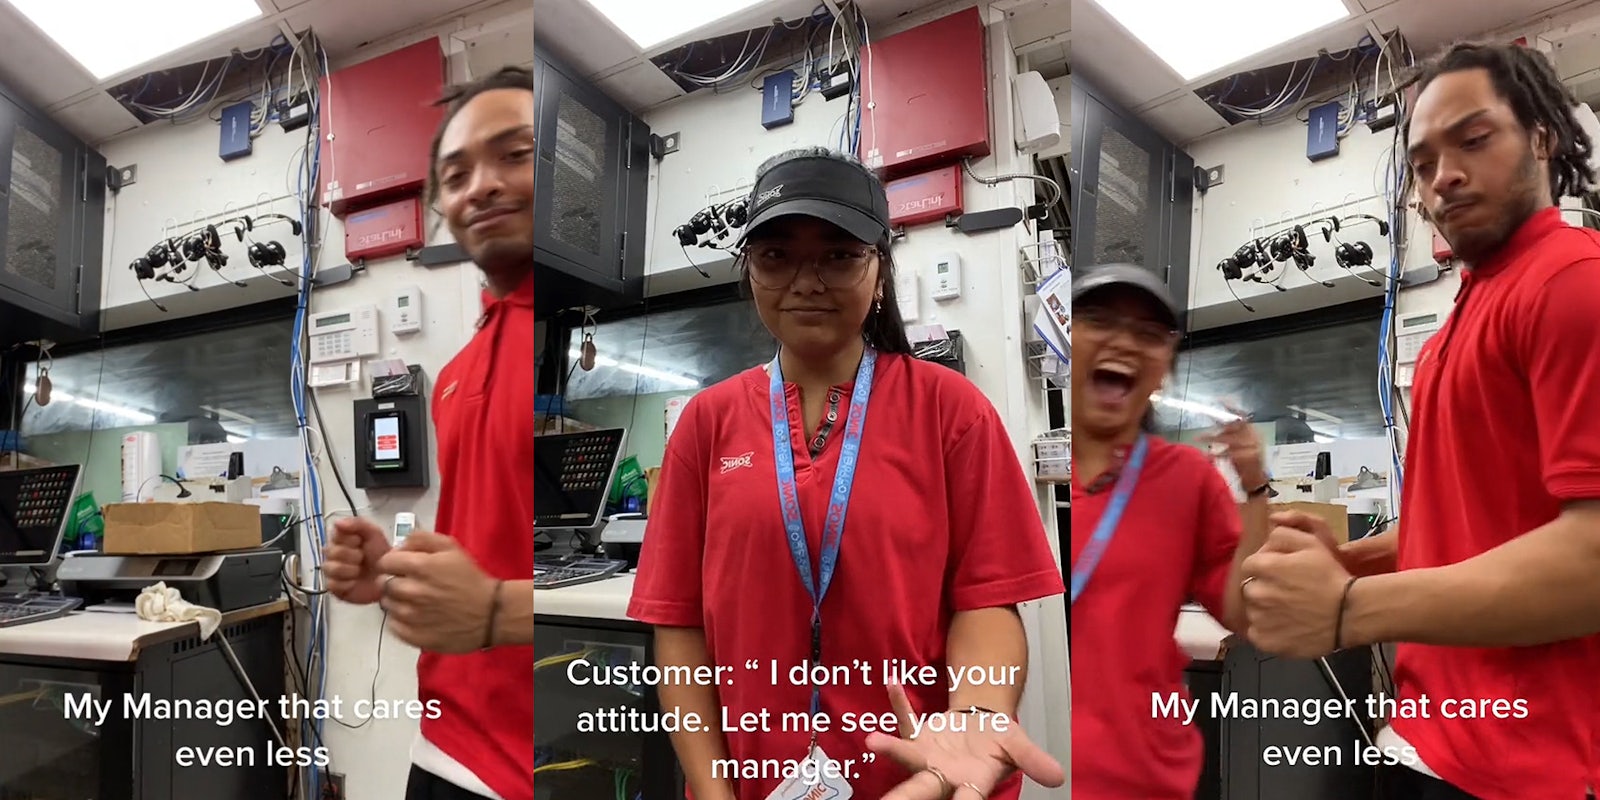 Sonic manager dancing into room caption 'My Manager that cares even less' (l) Sonic employee with hand out caption 'Customer: 'I don't like your attitude. Let me see your manager.'' (c) Sonic employee and manager dancing caption 'My Manager that cares even less' (r)